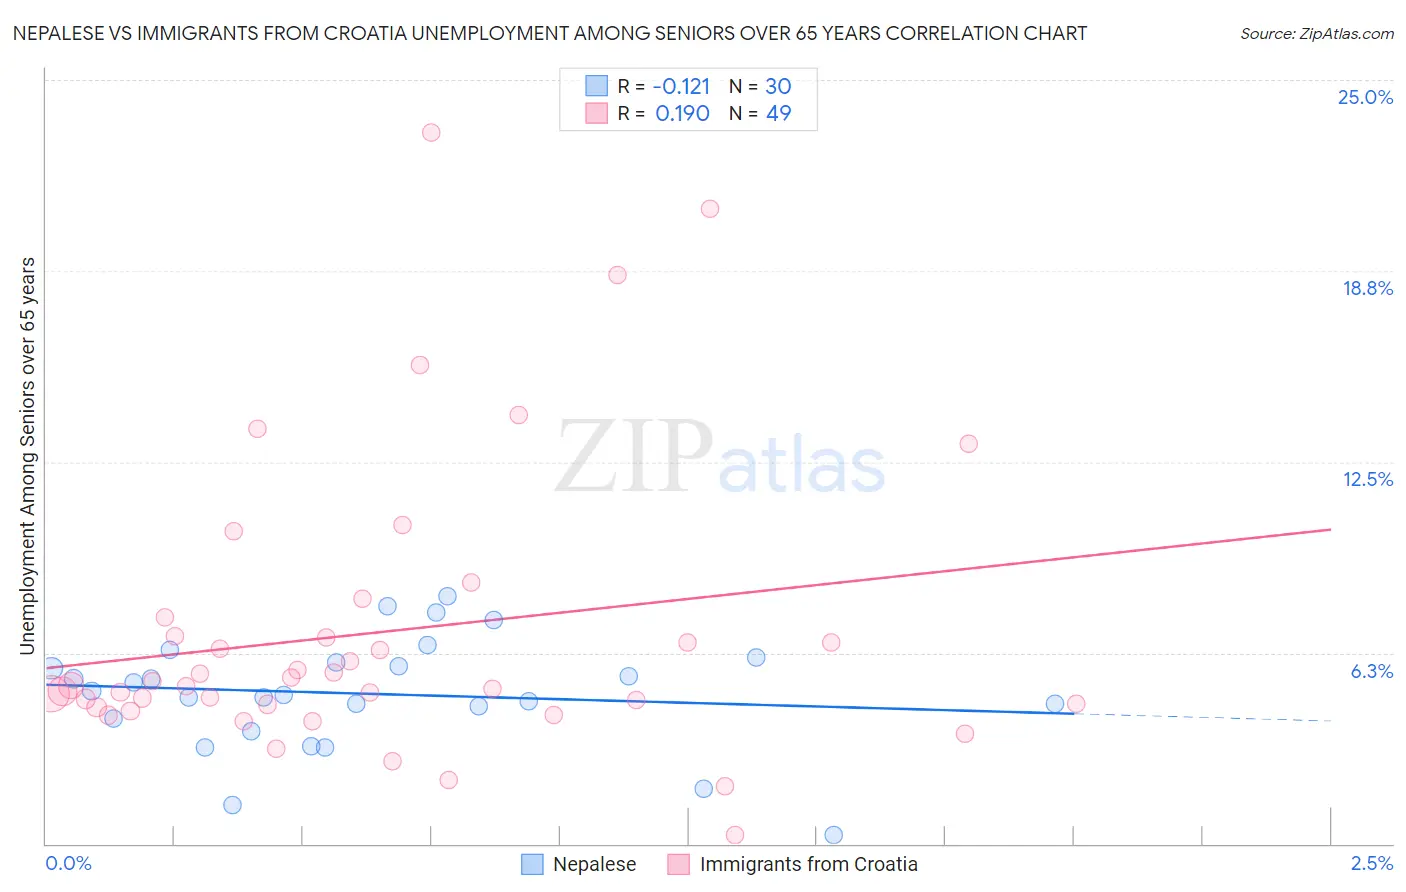 Nepalese vs Immigrants from Croatia Unemployment Among Seniors over 65 years